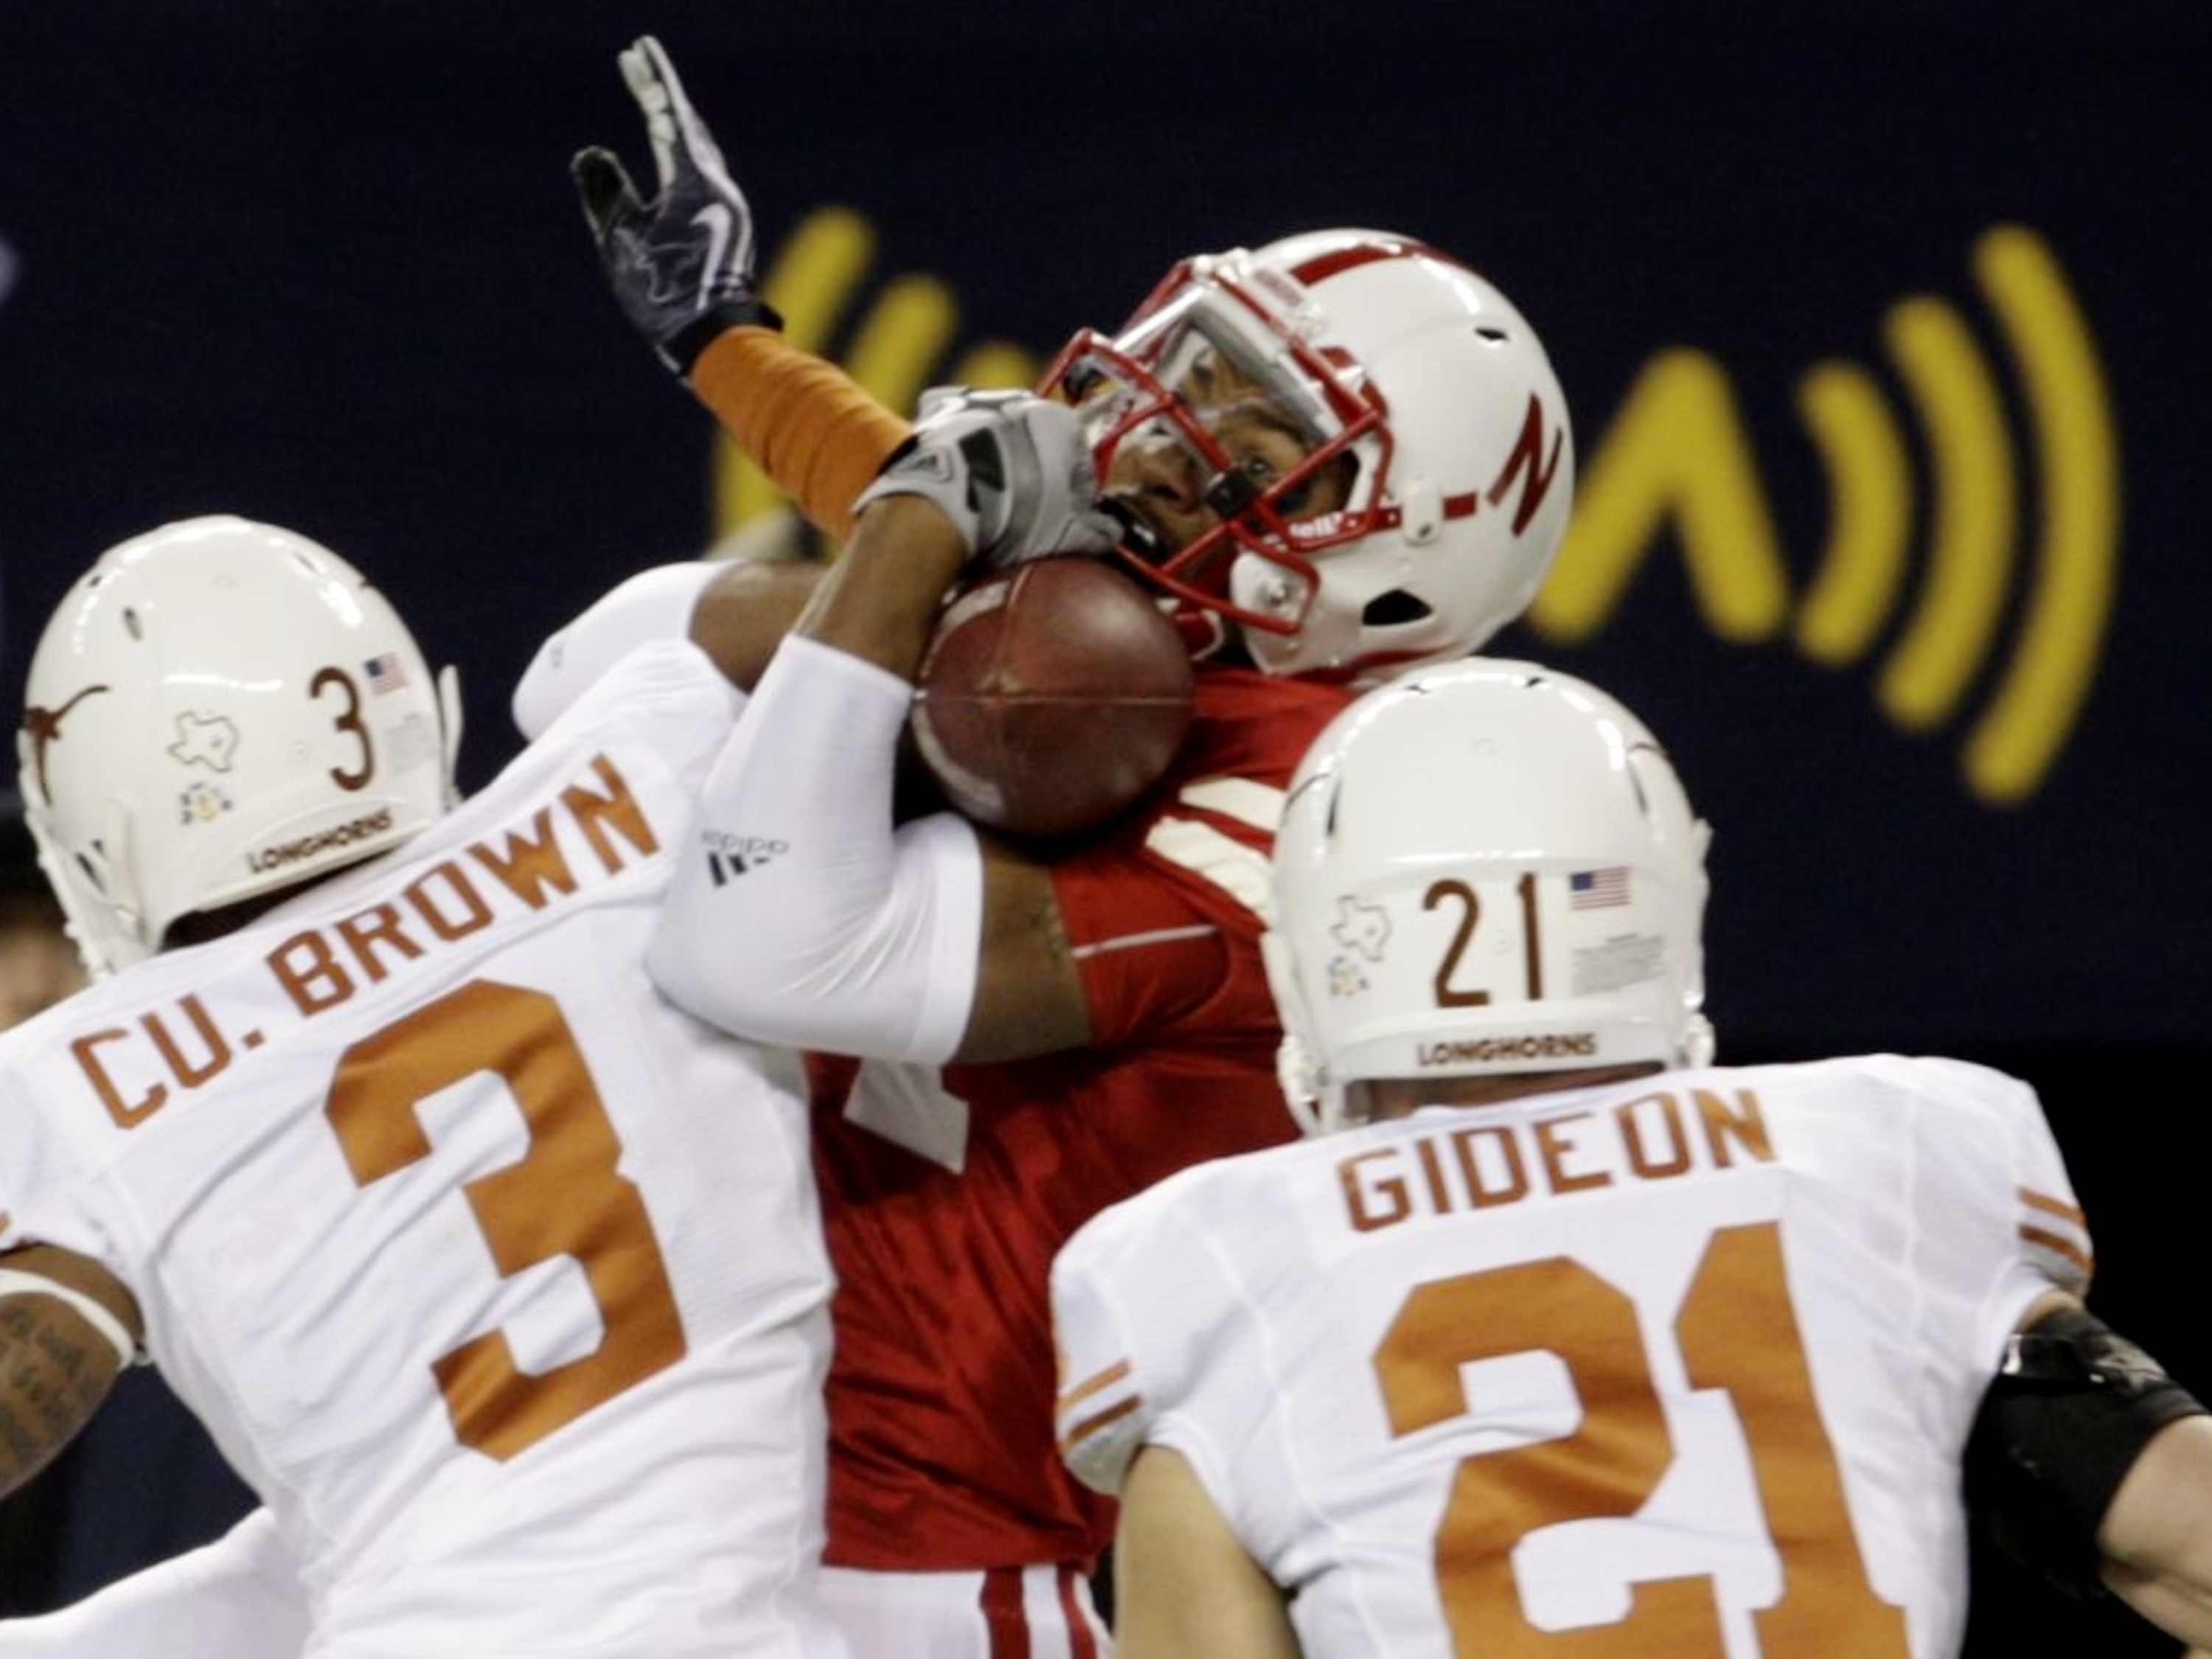 ARLINGTON, TX - DECEMBER 5:  Wide receiver Brandon Kinnie #84 of the Nebraska Cornhuskers cannot hold on for an incomplete pass in front of Curtis Brown #3 and Blake Gideon #21 of the Texas Longhorns in the first quarter of the game at Cowboys Stadium on 